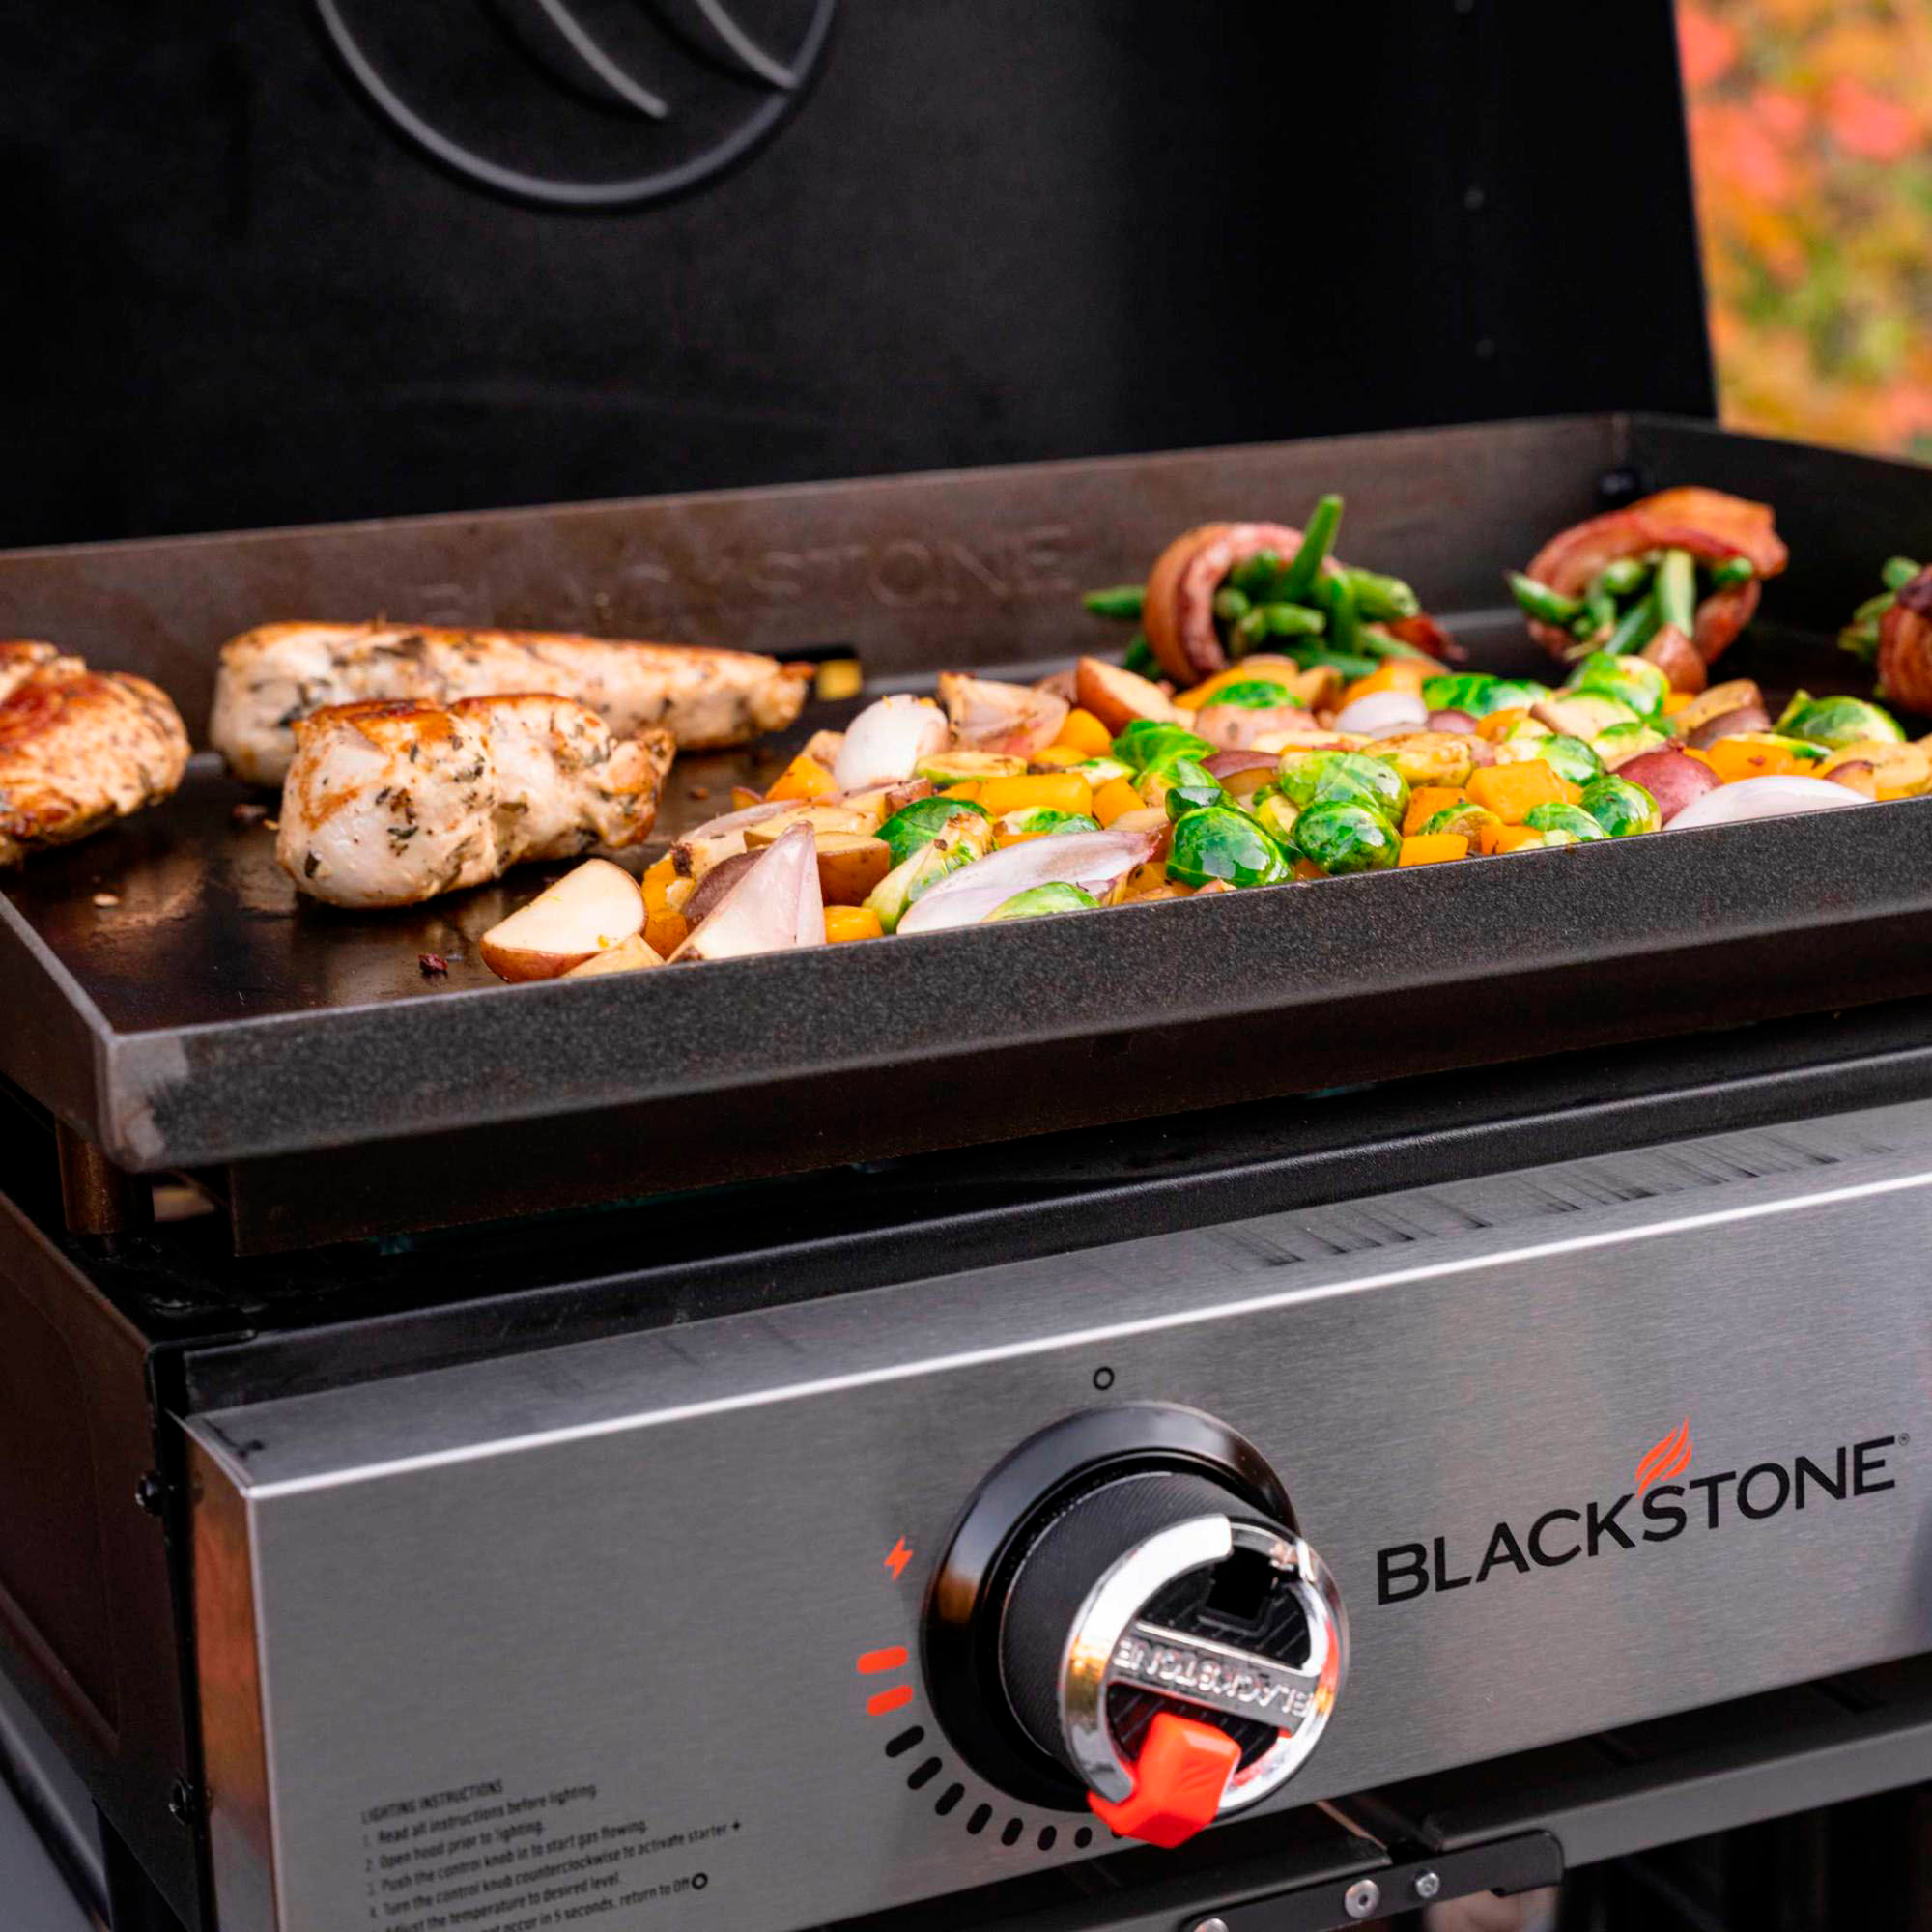 Countertop 6-Burner Portable Tabletop Gas Grill Griddle Outdoor